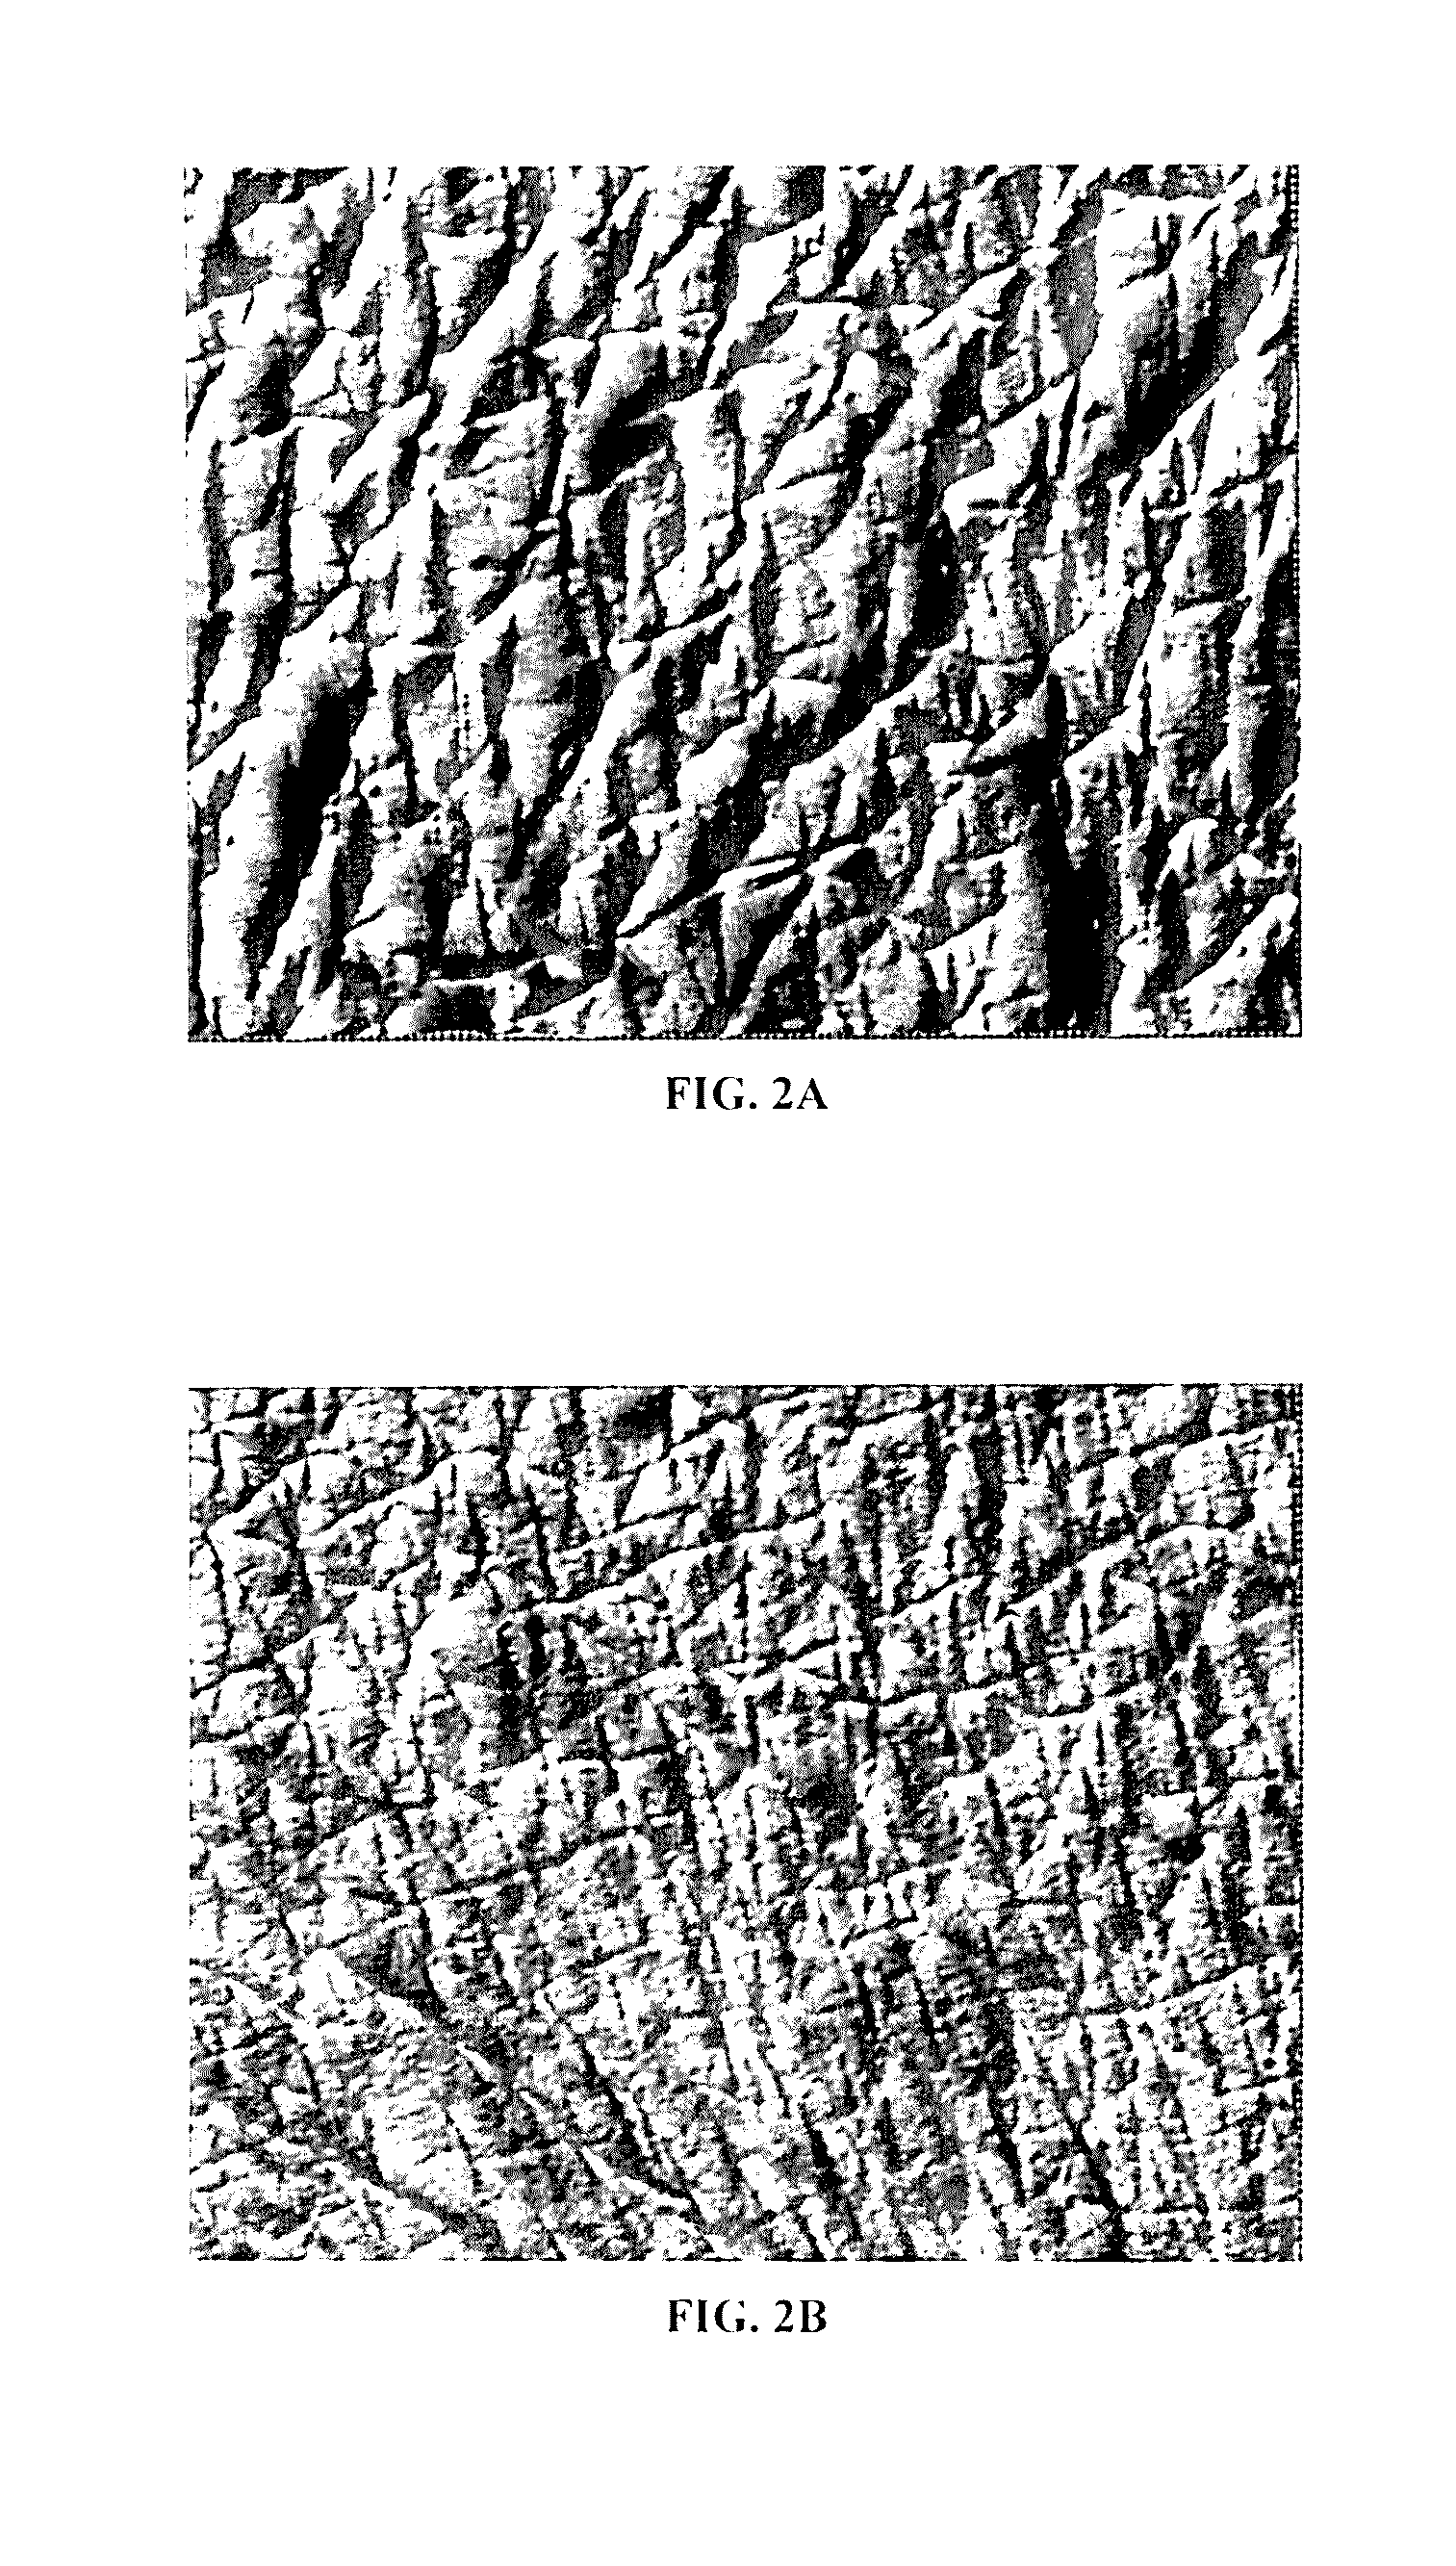 Cosmetic compositions and uses thereof